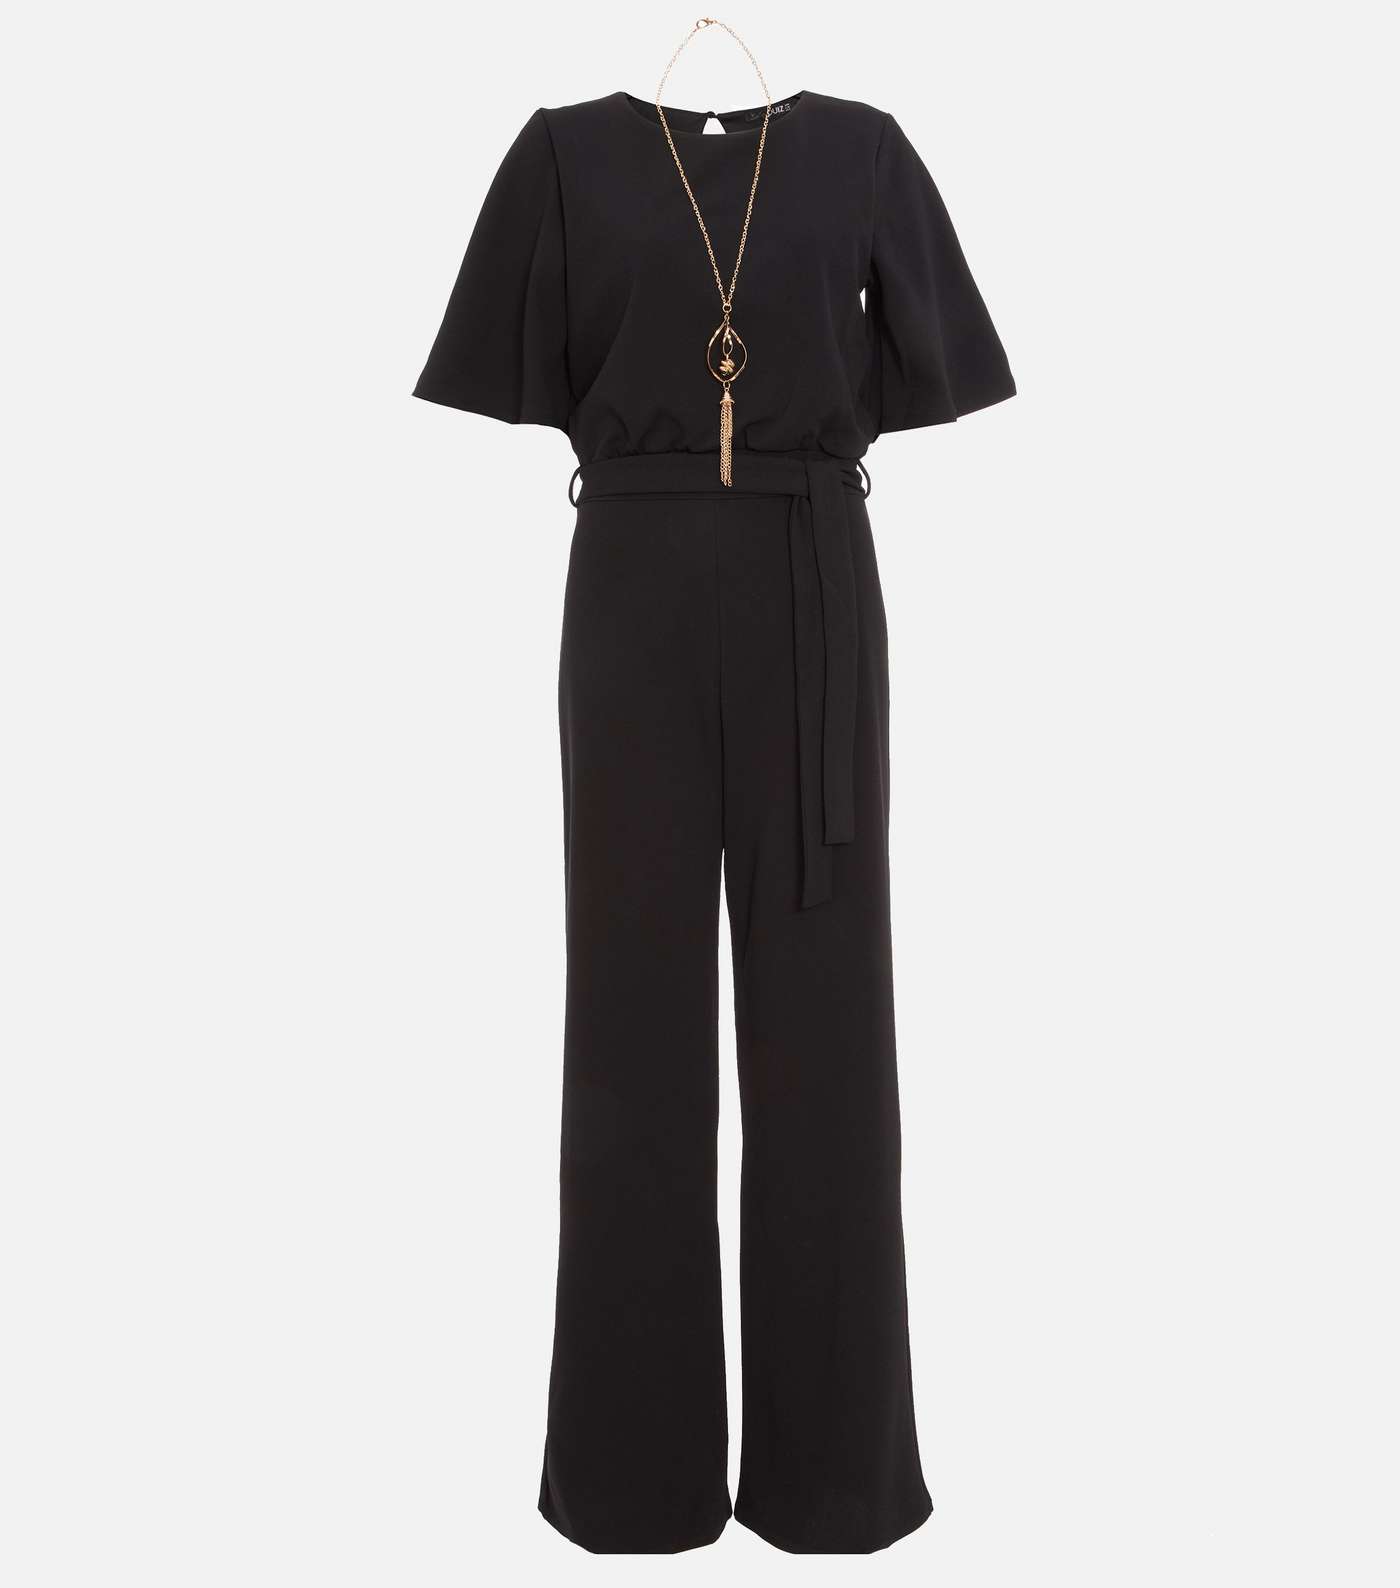 QUIZ Black Belted Jumpsuit with Necklace Image 4